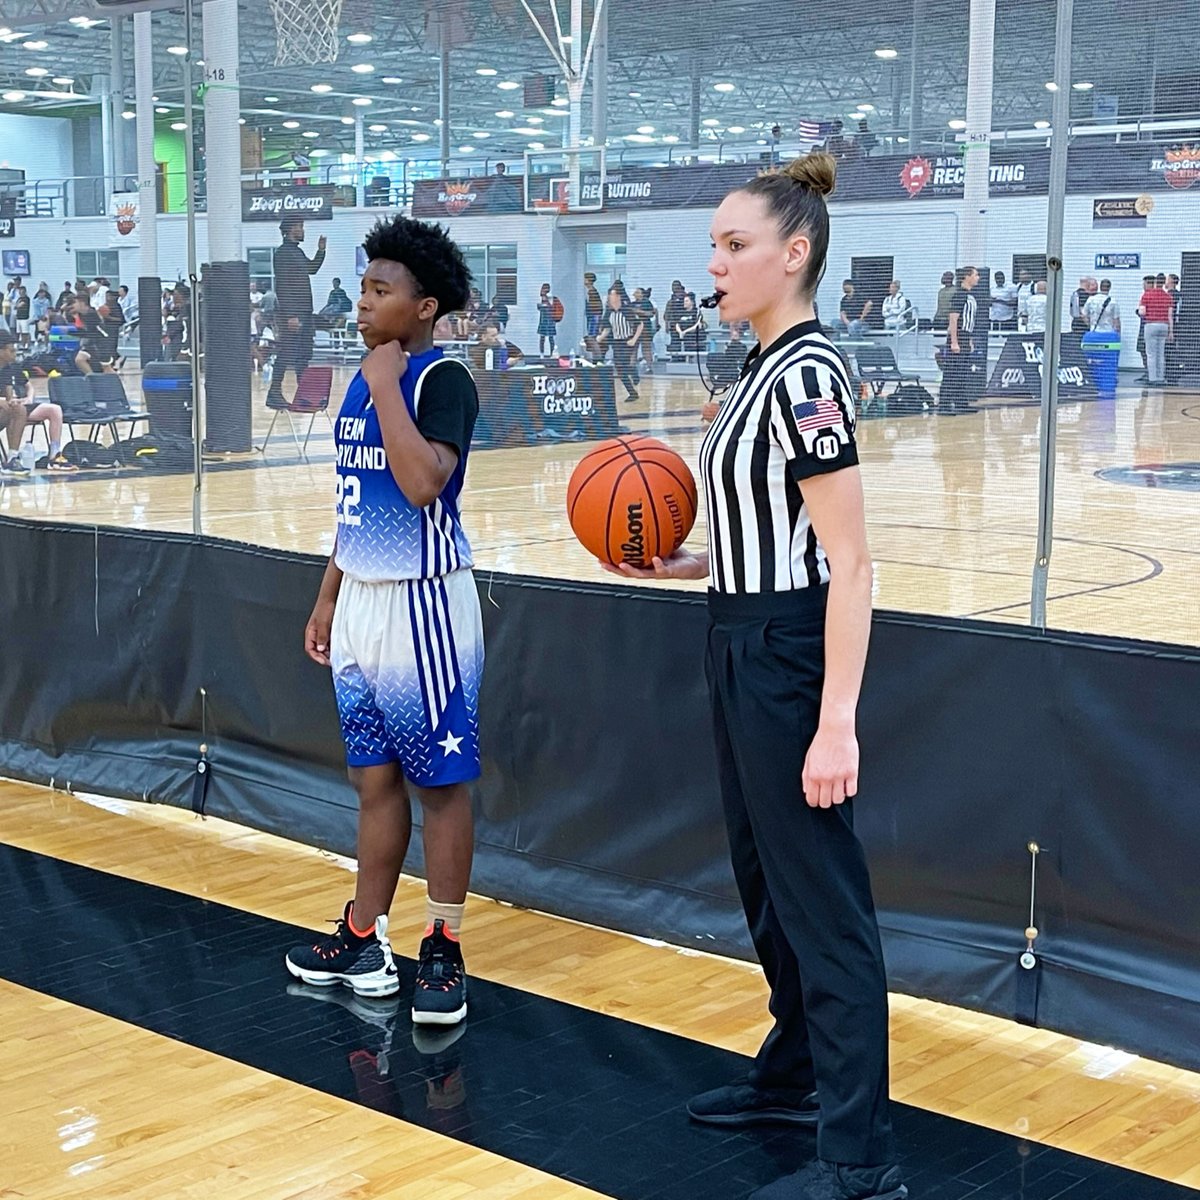 We love seeing our officials in action!

#SportsOfficials #Basketball #SportsPhotography #RefereeLife #GameTime #Sportsmanship #SportsMoments #RefereeCommunity #Officiating #RefereePics #officialsarehumantoo #respect